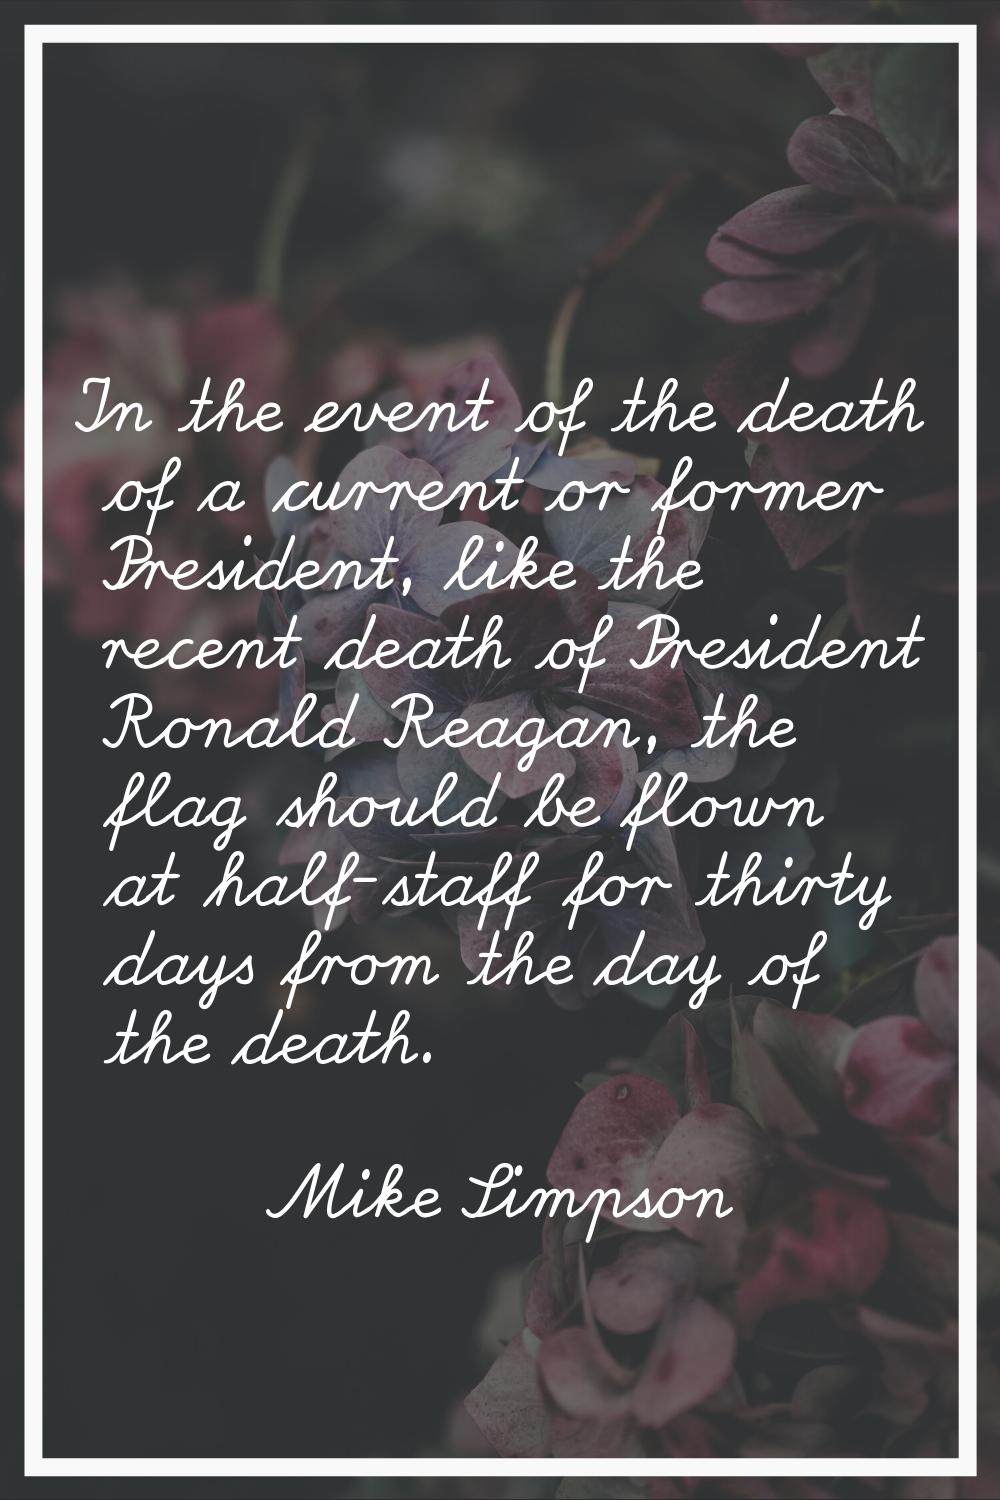 In the event of the death of a current or former President, like the recent death of President Rona